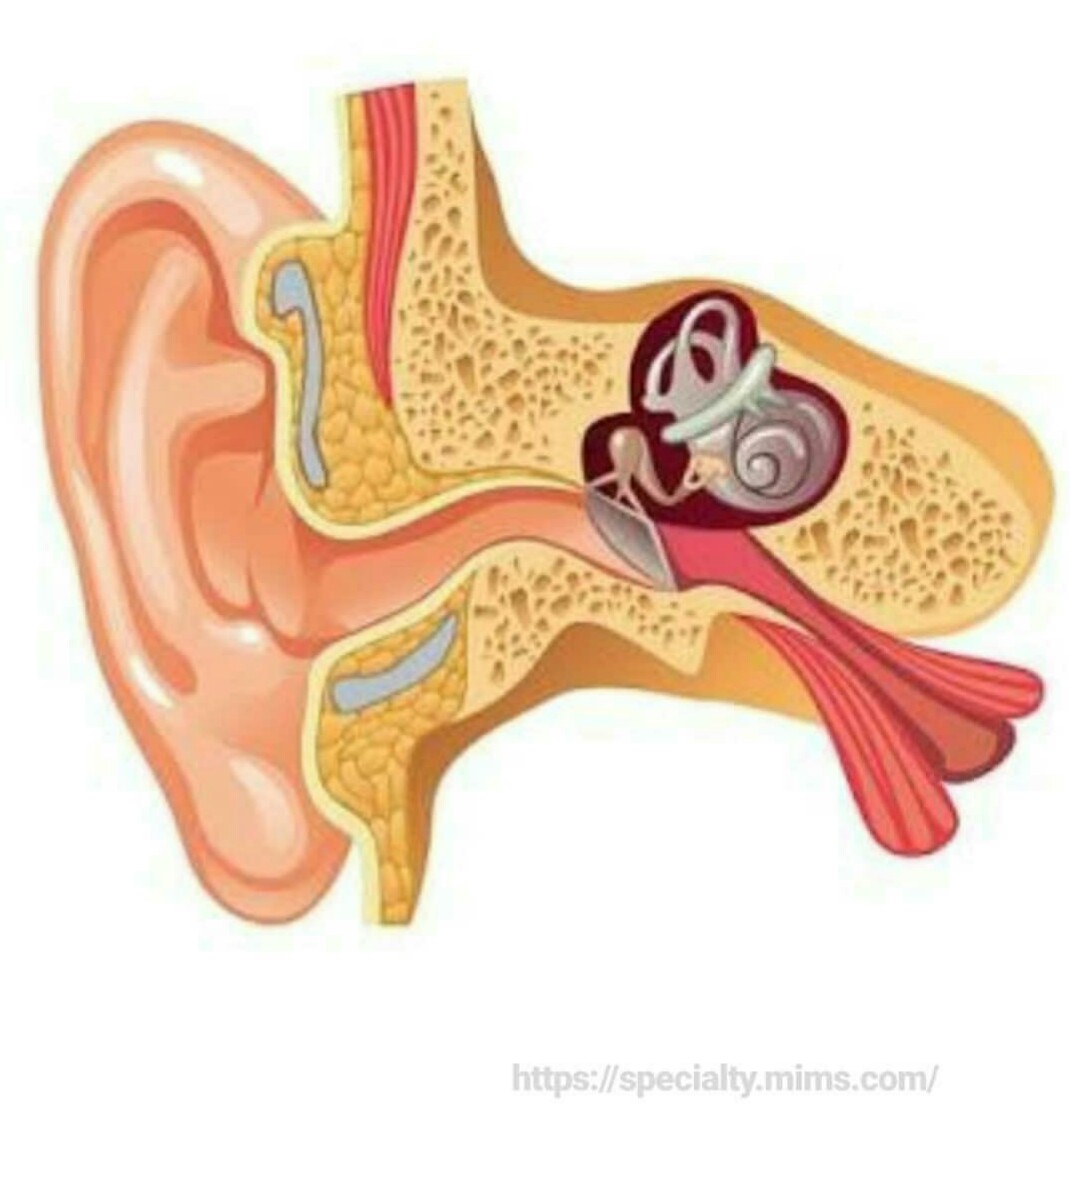 WHAT CAUSES OTITIS MEDIA AND HOW IT IS TREATED?